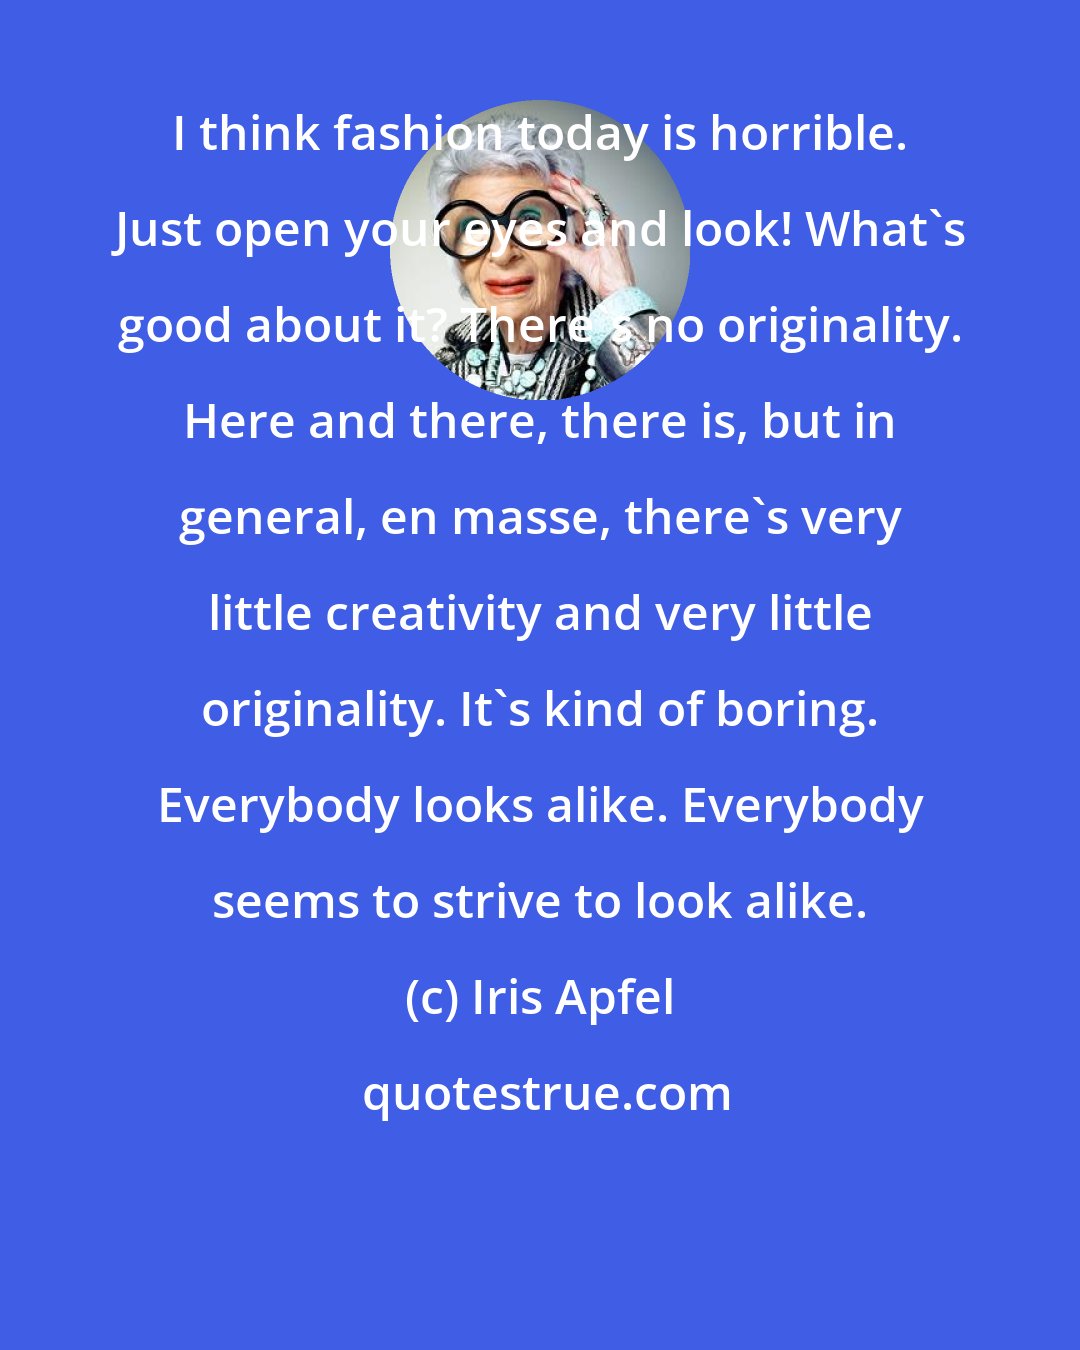 Iris Apfel: I think fashion today is horrible. Just open your eyes and look! What's good about it? There's no originality. Here and there, there is, but in general, en masse, there's very little creativity and very little originality. It's kind of boring. Everybody looks alike. Everybody seems to strive to look alike.